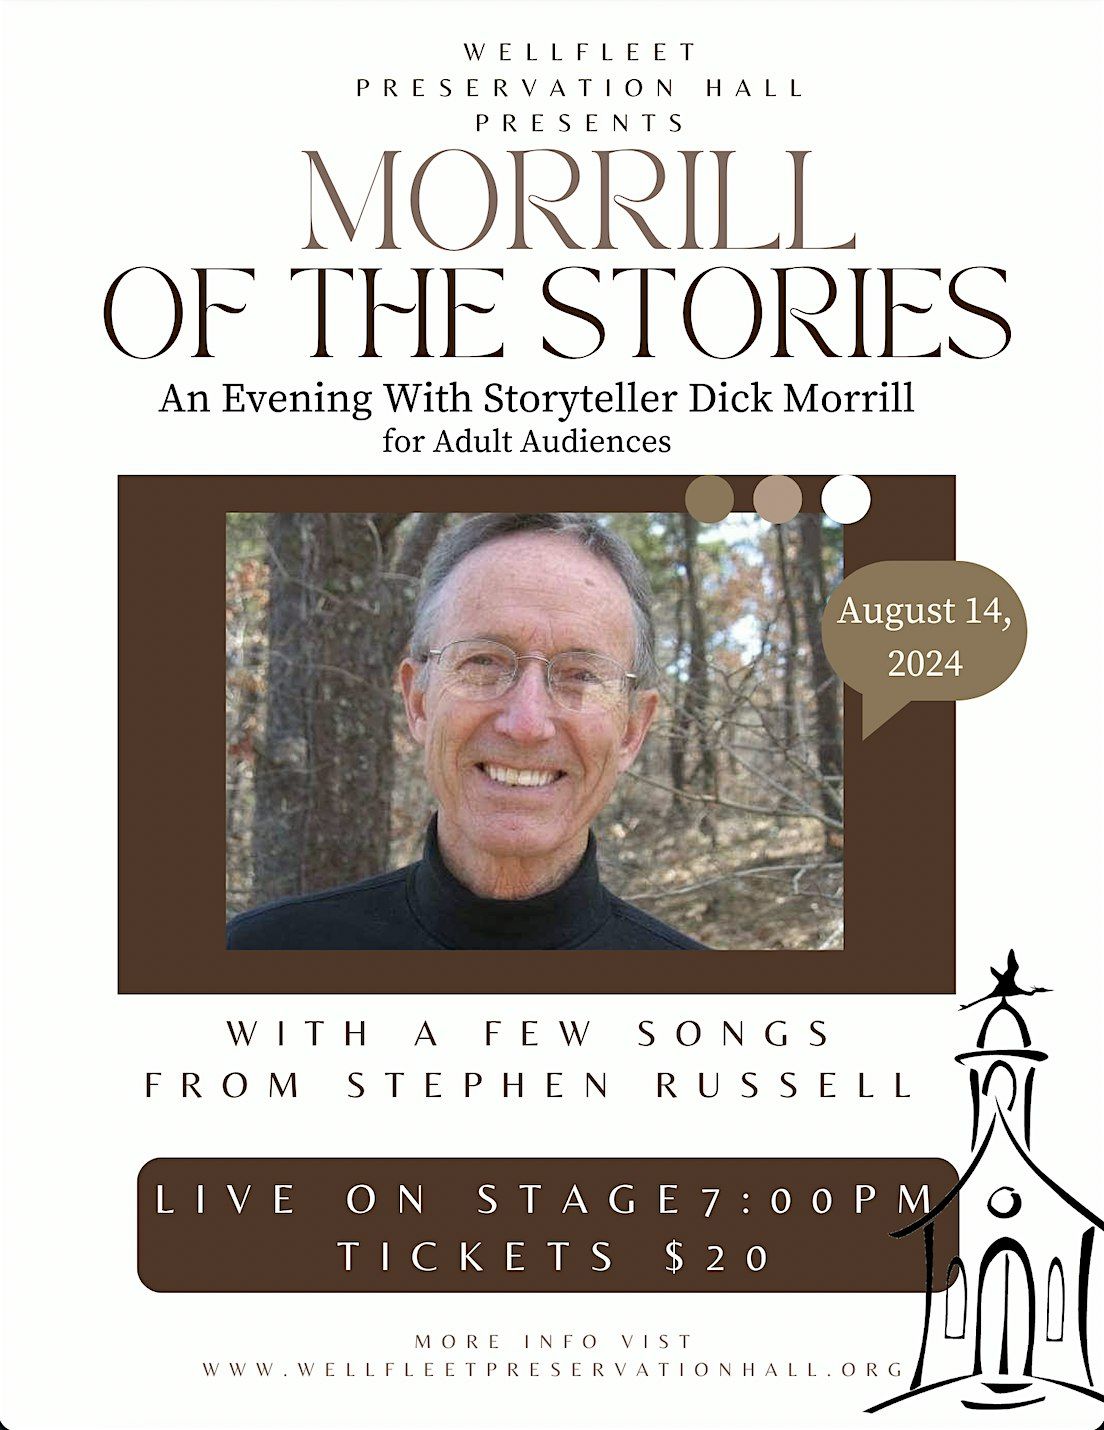 Morrill of the Stories